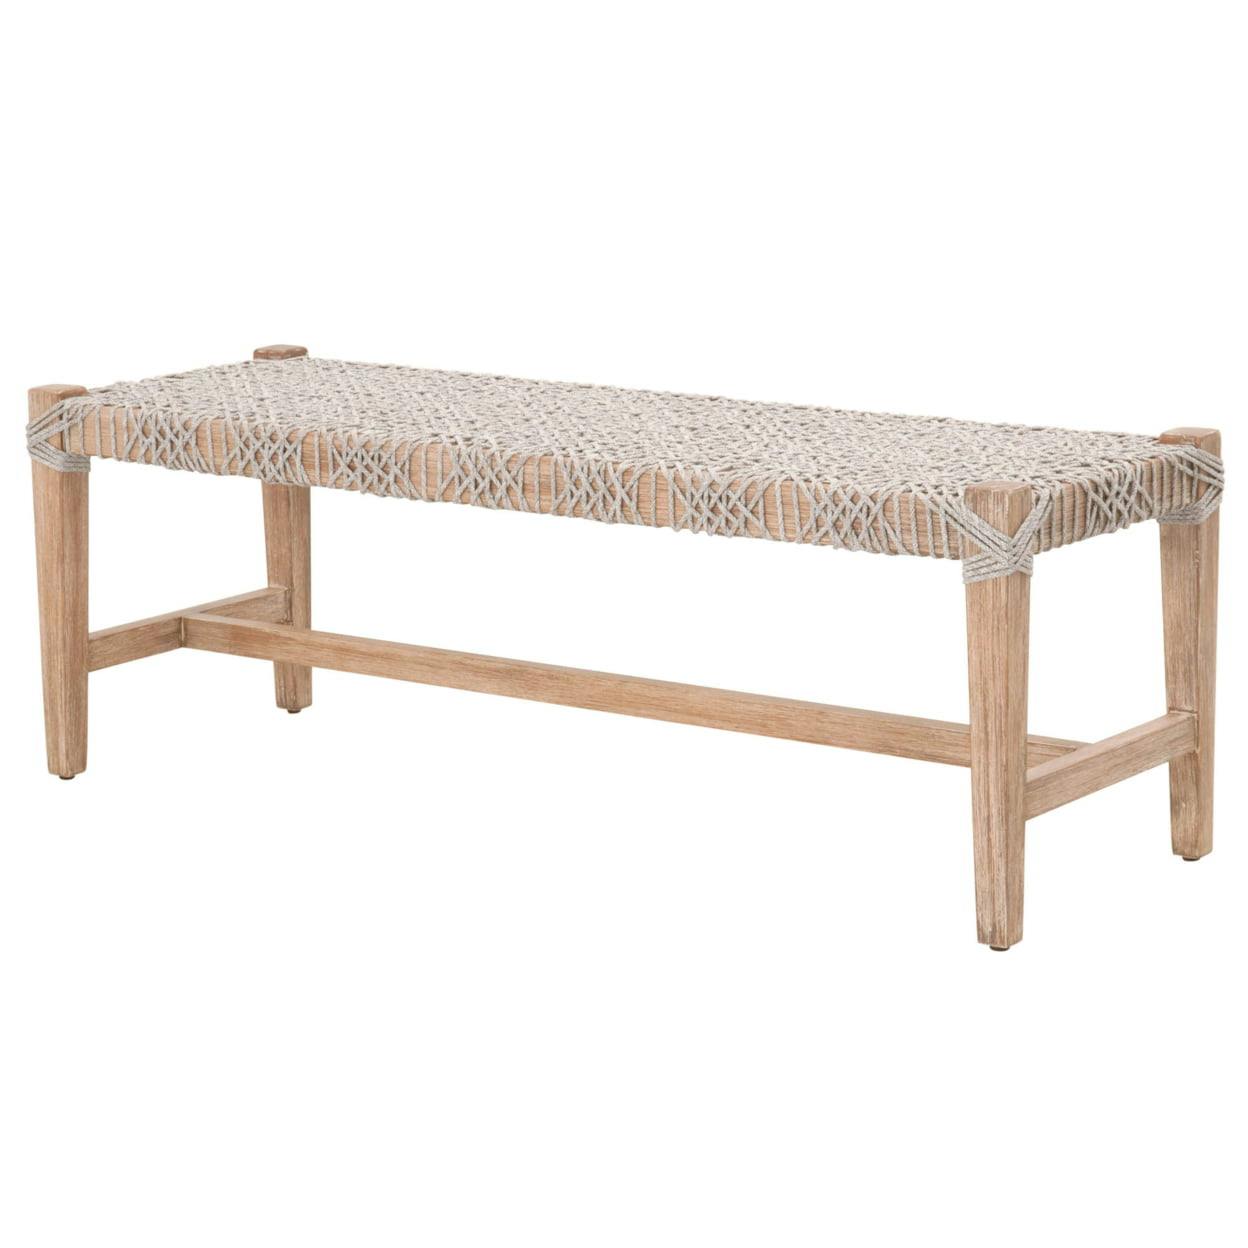 Transitional Gray and Brown Rope-Top Bench with Trestle Base